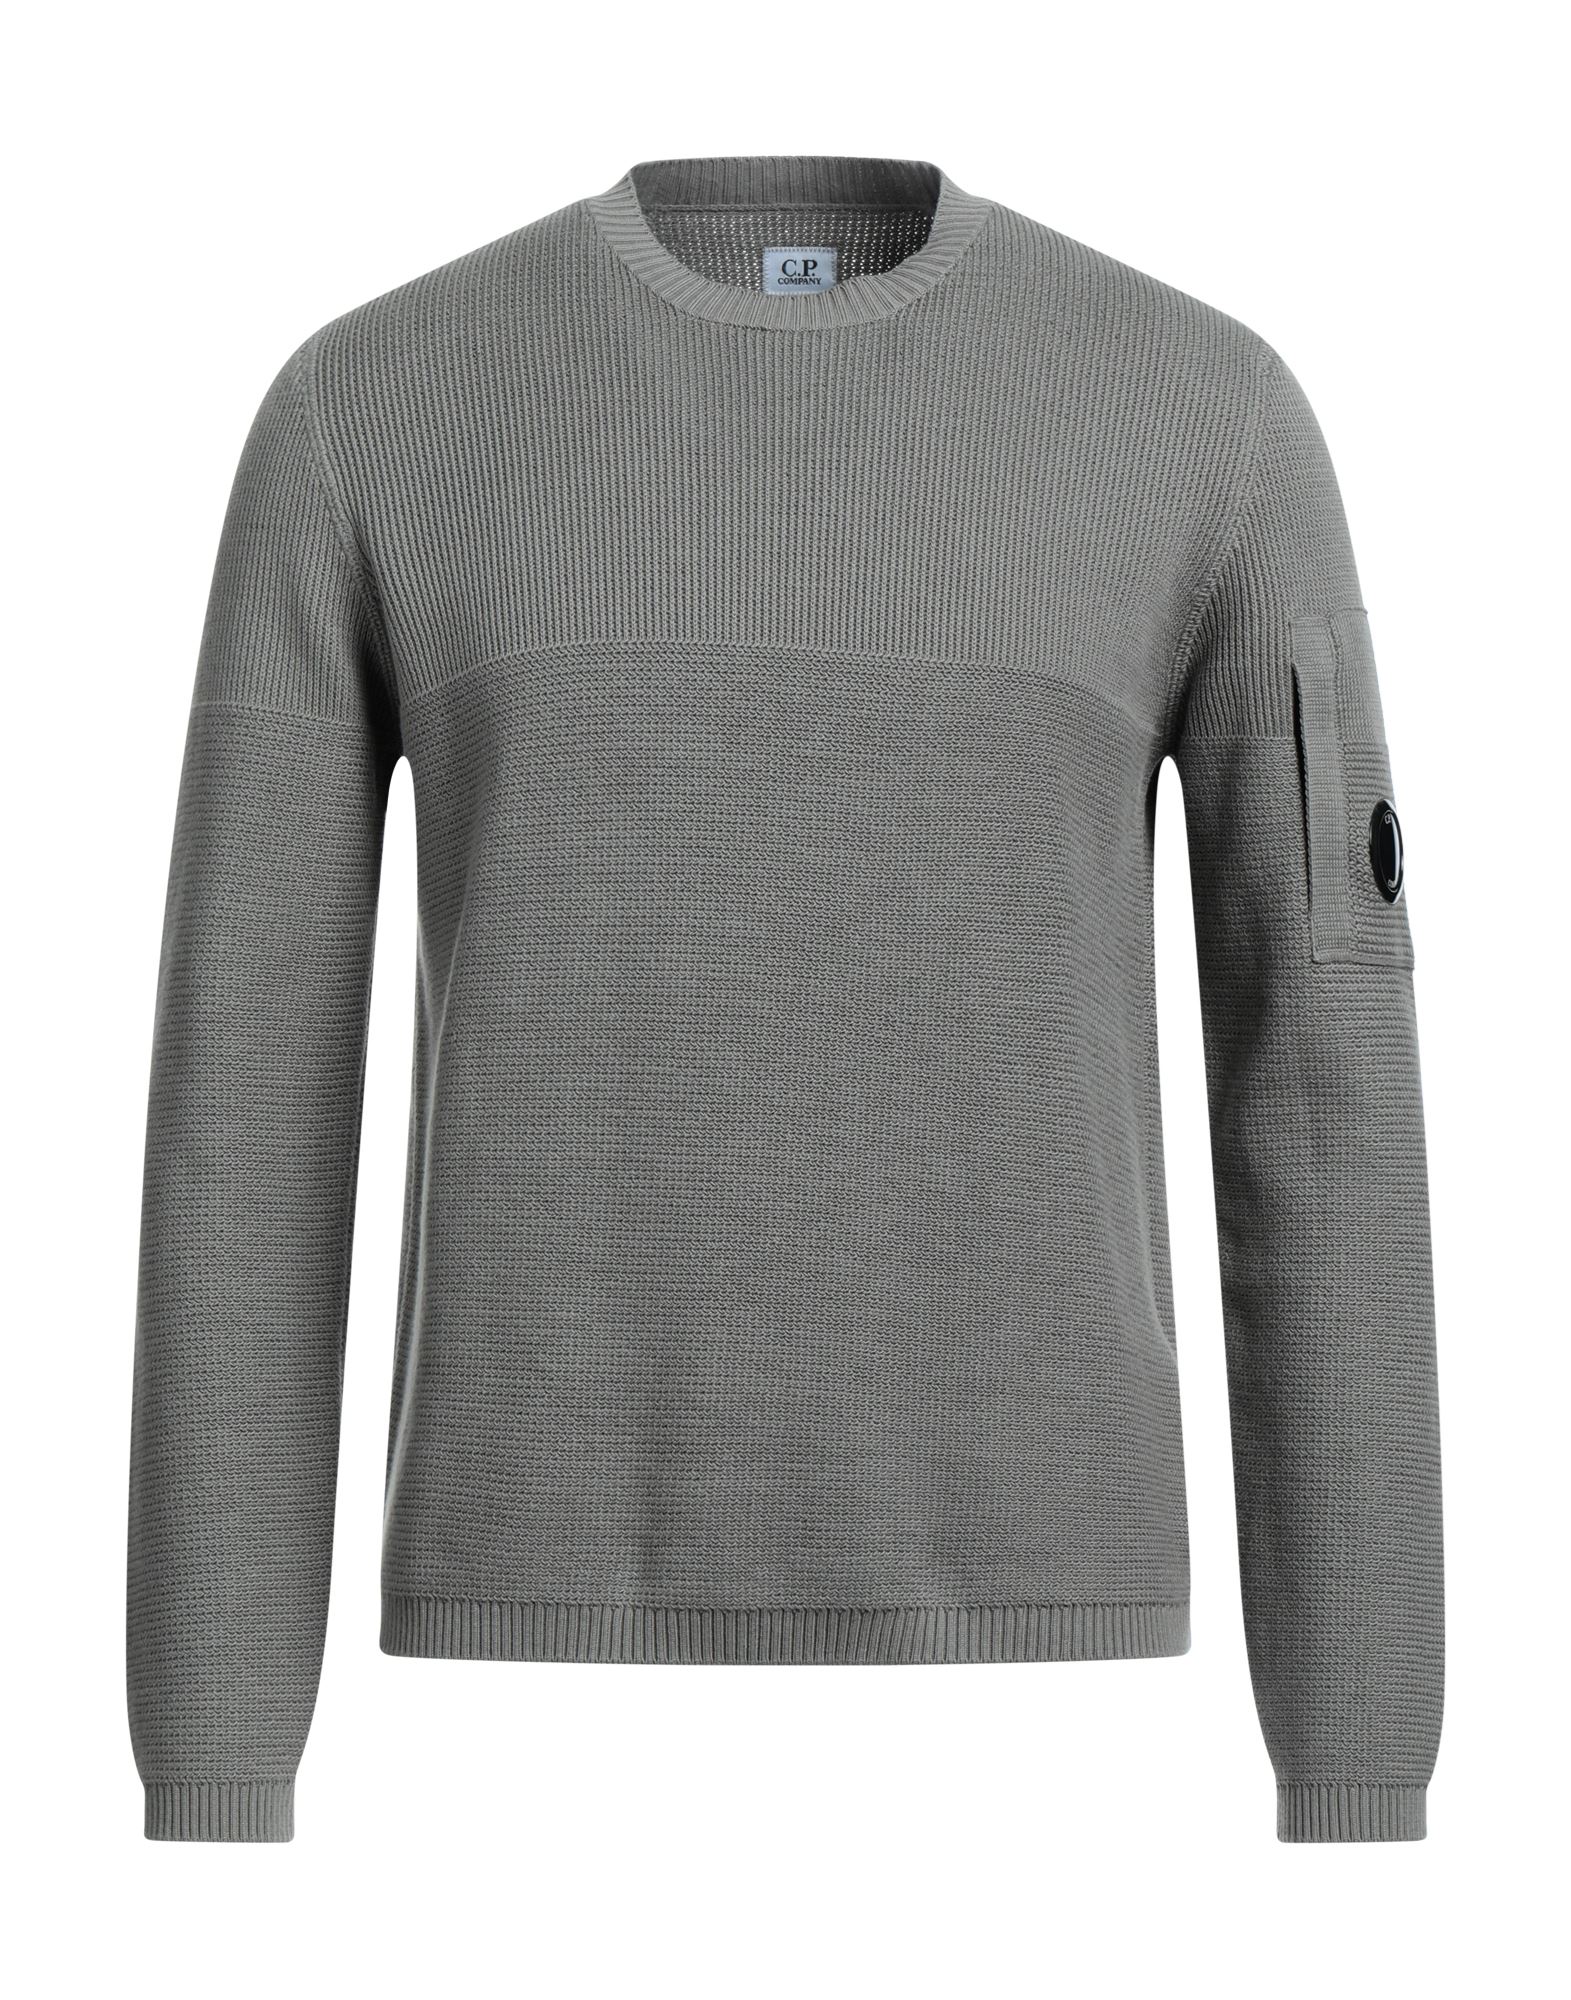 C.p. Company Sweaters In Sage Green